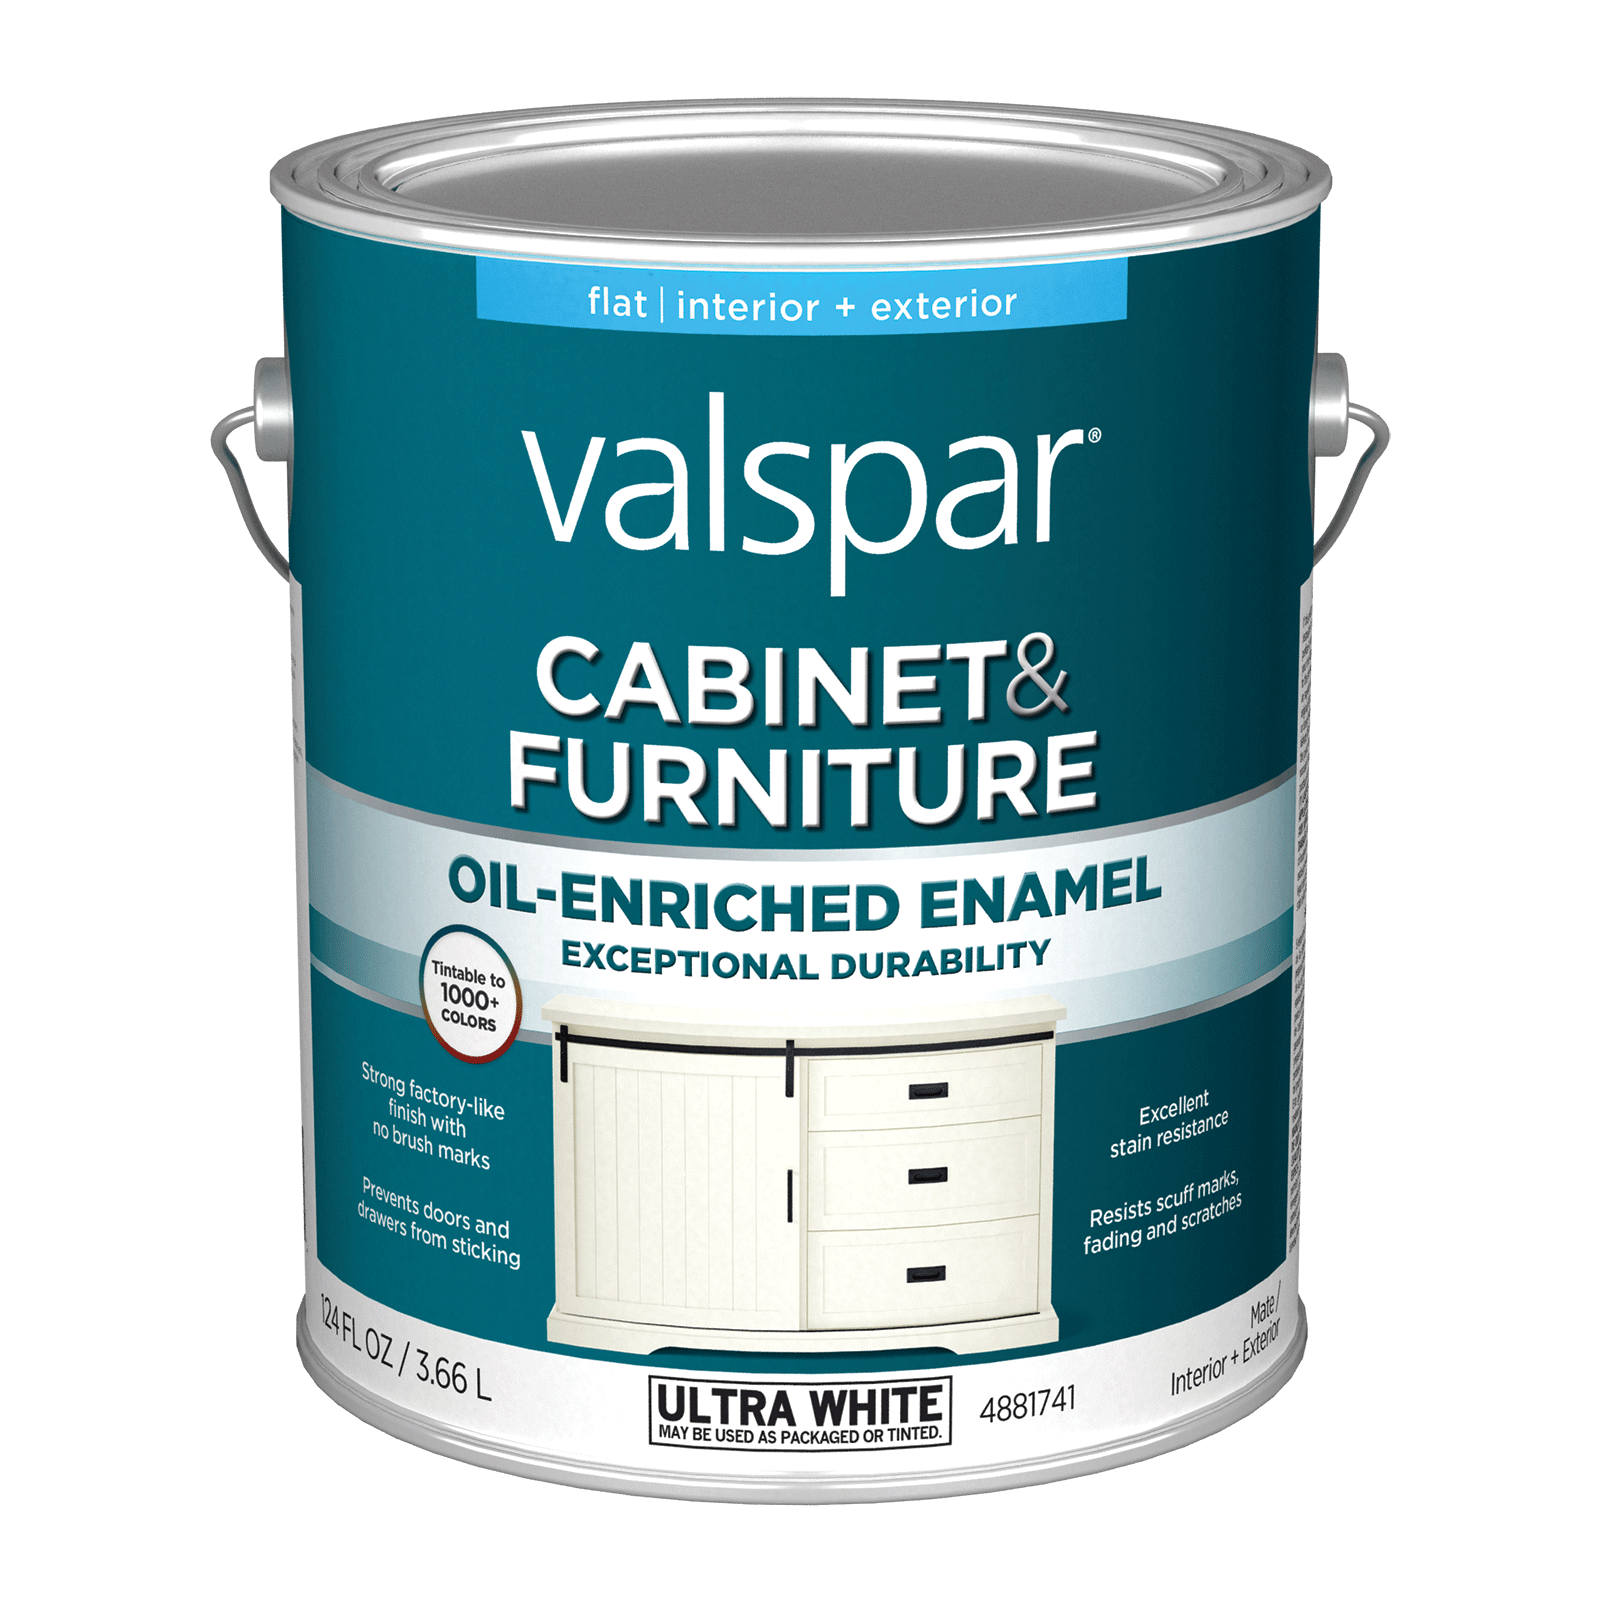 valspar-flat-specialty-commercial-paint-at-lowes